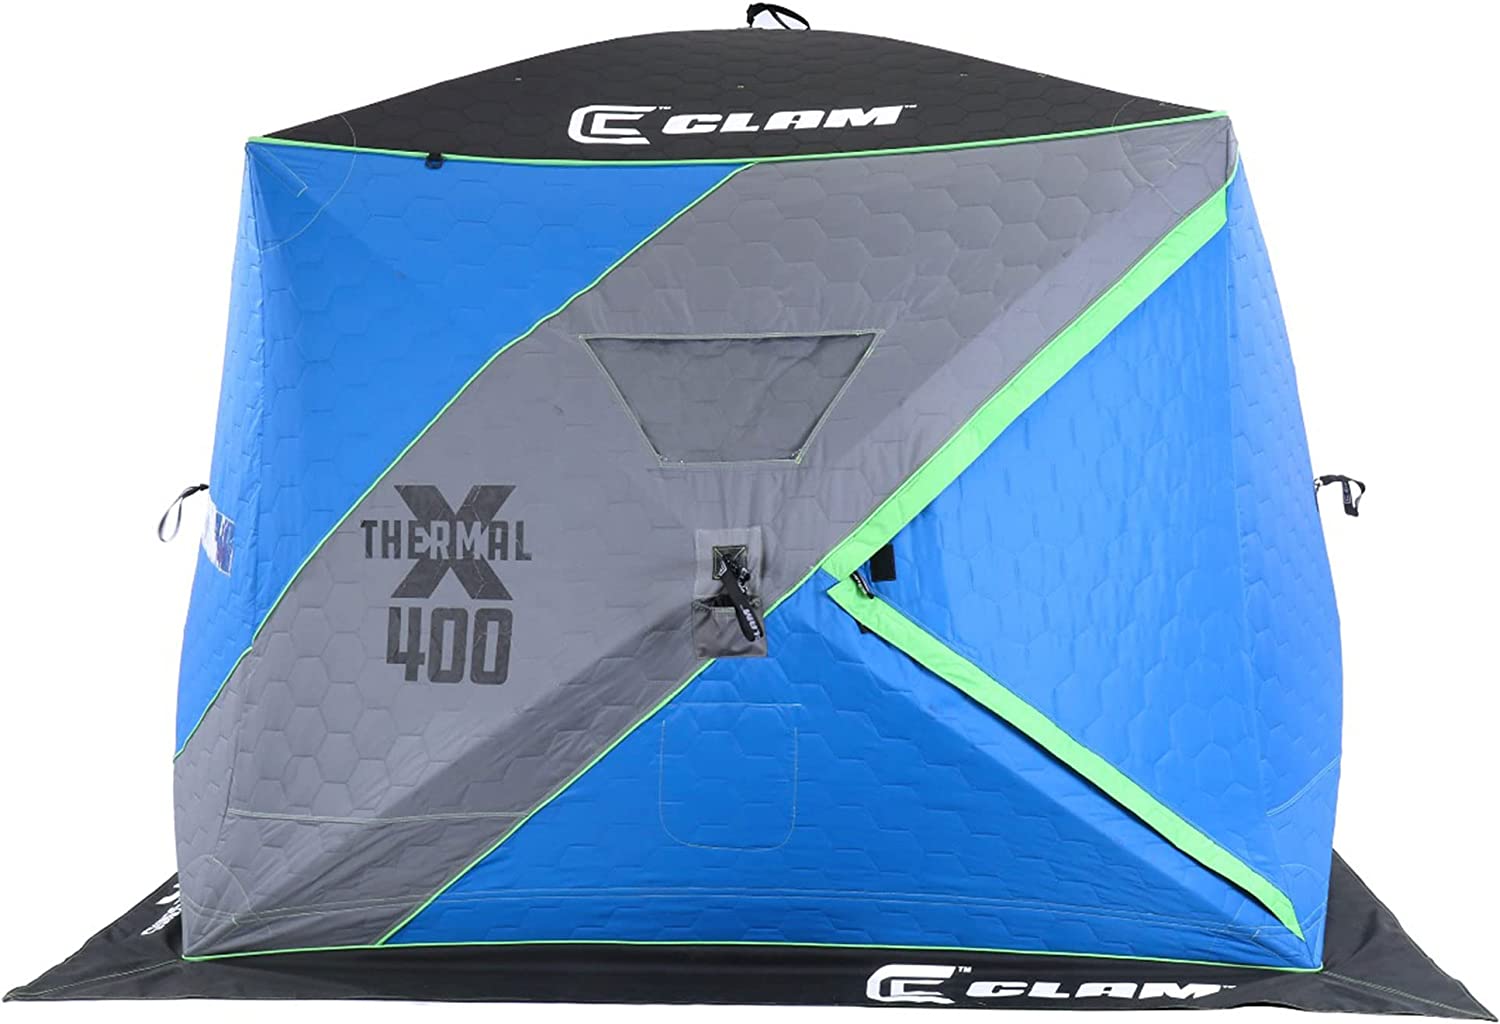 clam x 400 pop up ice fishing tent